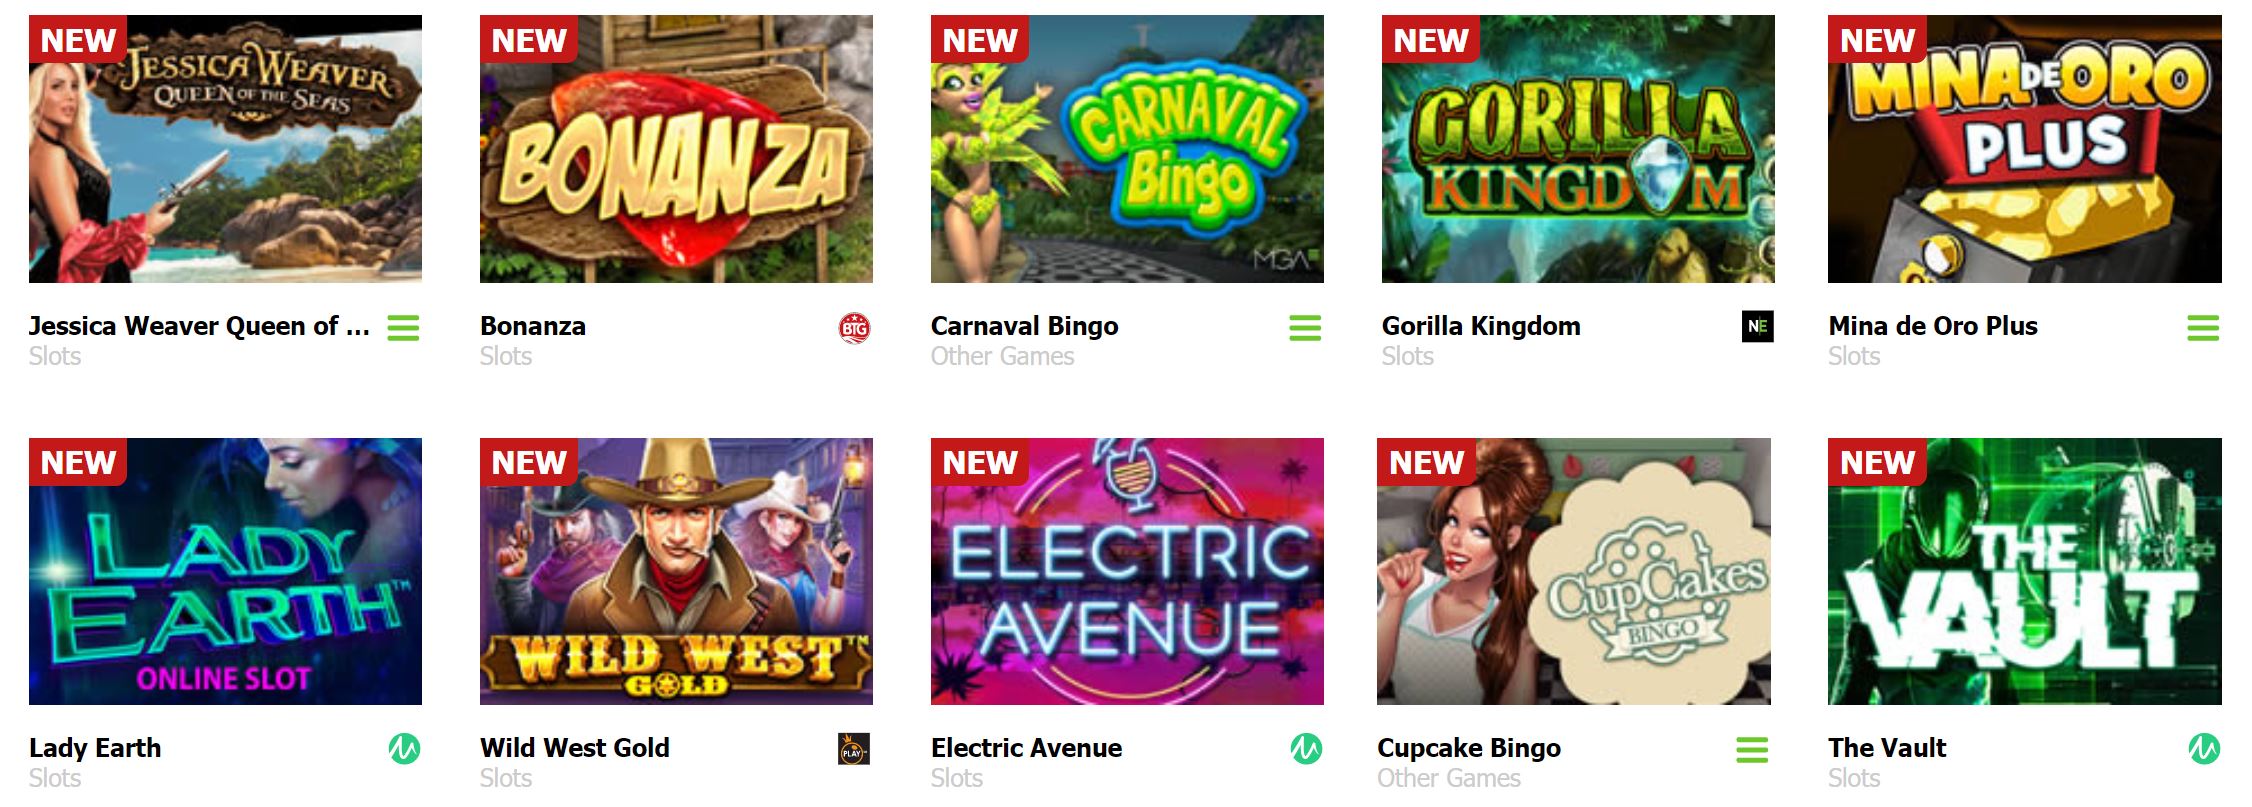 This casino has a wide range of online gambling.